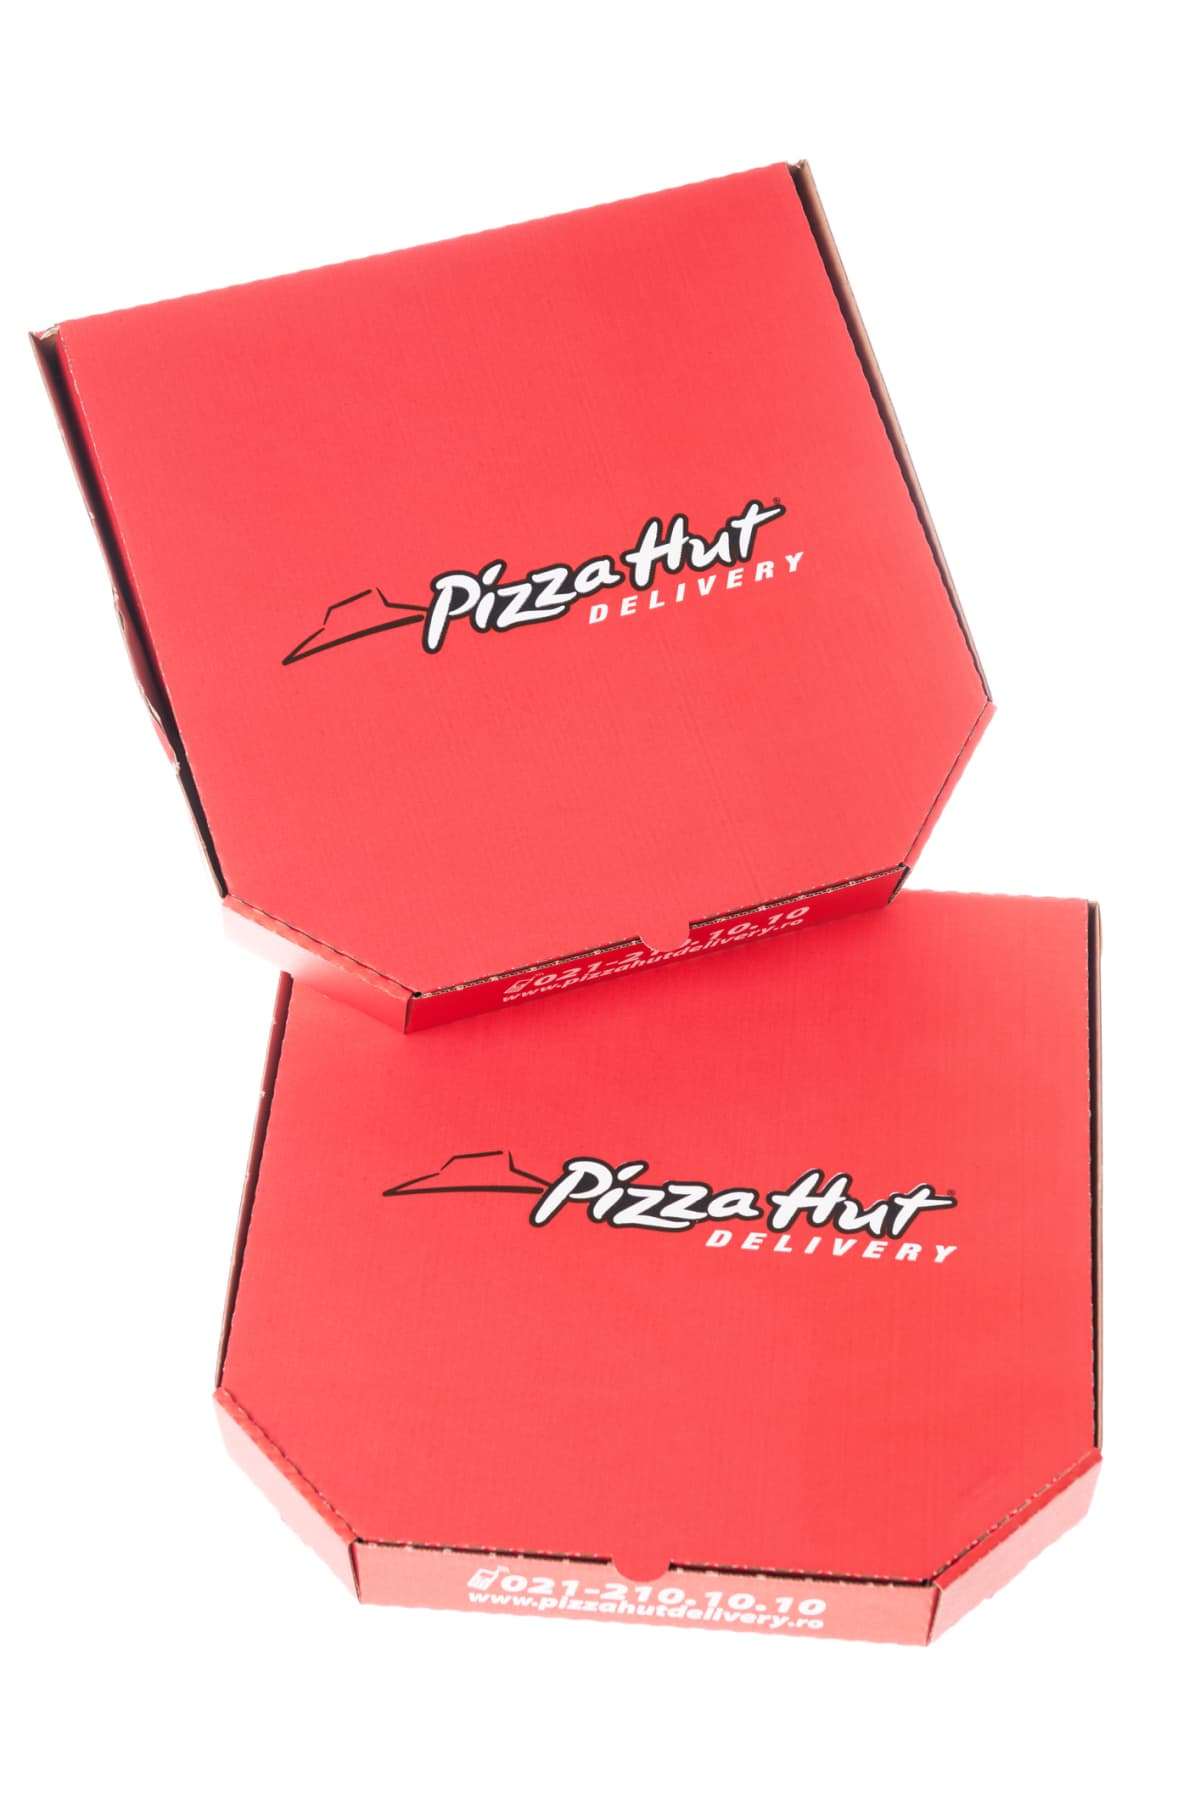 Bucharest, Romania - October 4, 2013: Pizza Hut delivery boxes. 